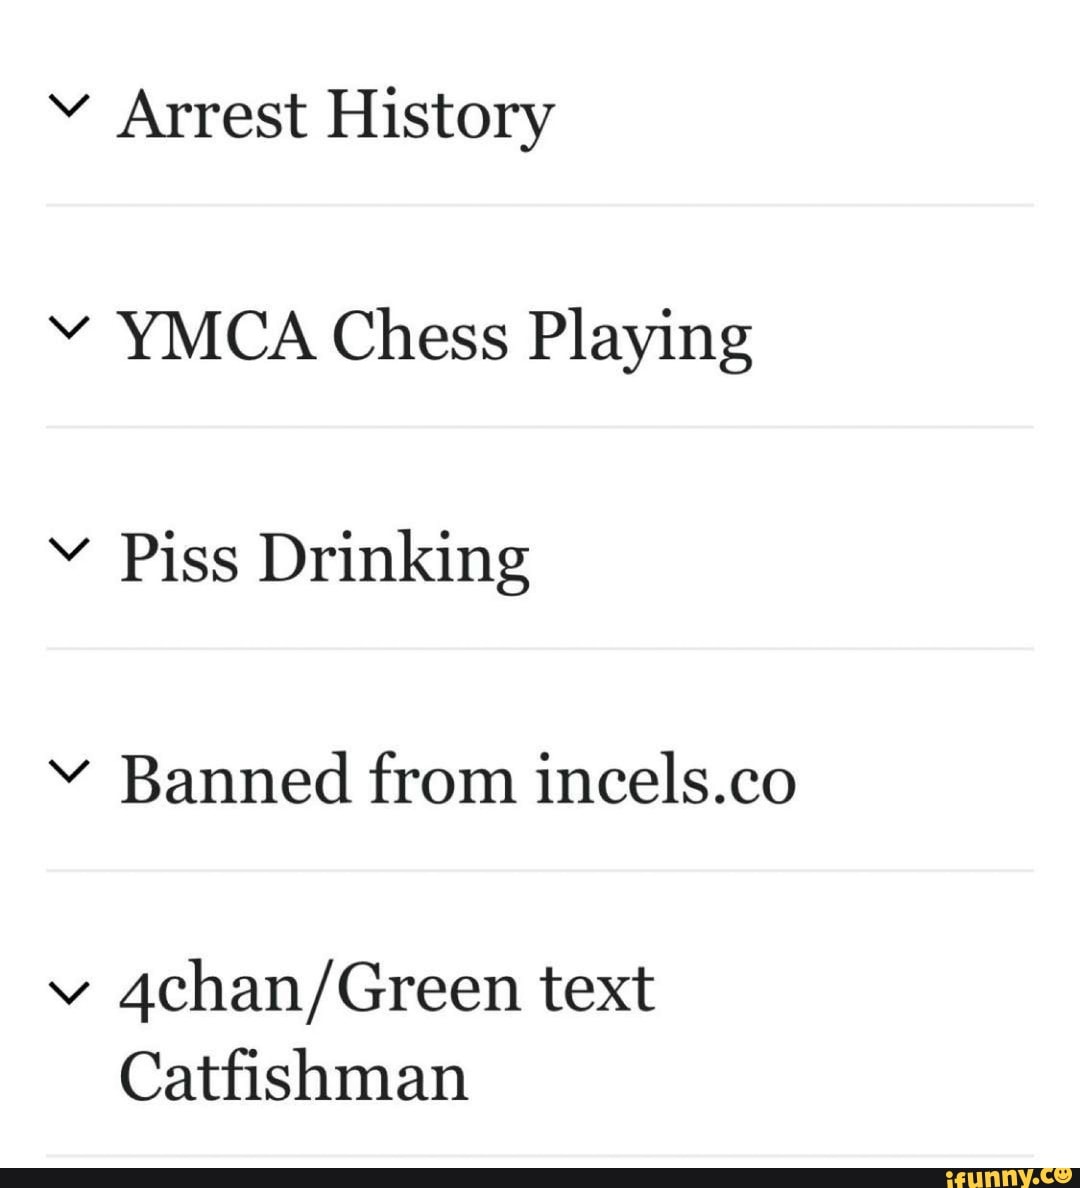 Arrest History Y YMCA Chess Playing Piss Drinking Banned from incels.co